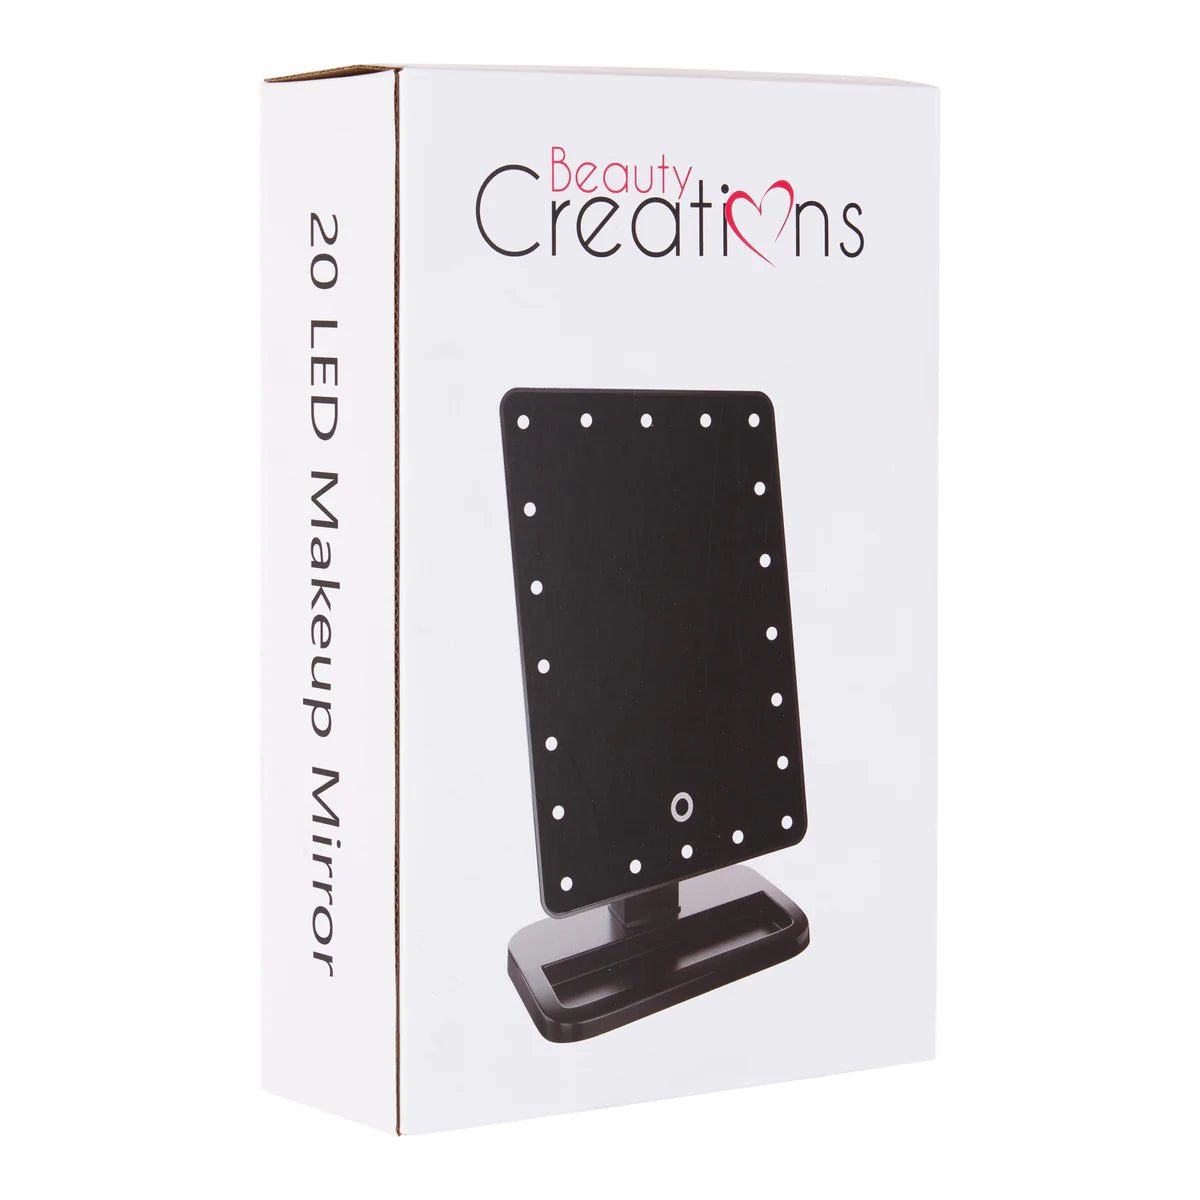 Beauty Creations - 20 LED TOUCH SMALL MIRROR - BLACK